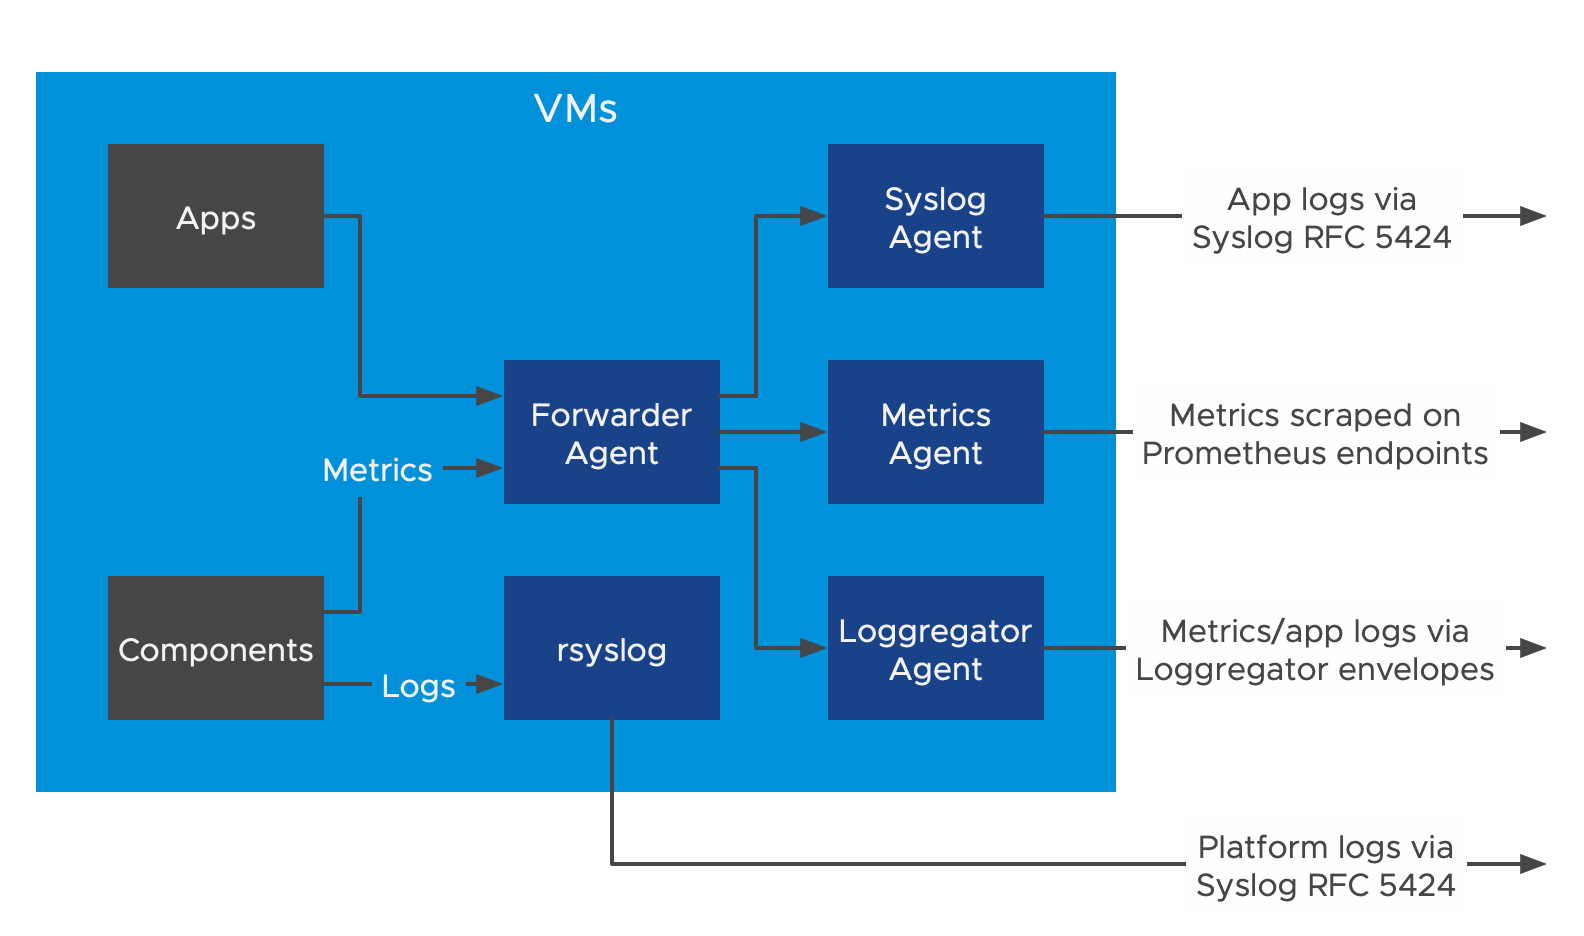 A Forwarder Agent appears inside a square labeled VMs. Apps are shown sending to the Forwarder Agent, and Components are shown sending metrics to the the Forwarder Agent. Components also send logs to rsyslon, which then sends platform logs outside the system via syslog RFC5424. The Forwarder Agent sends to three downstream consumers. The Syslog Agent sends application logs via syslog RFC5424. The Metrics Agent exposes metrics via Prometheus endpoints. Finally, the Loggregator Agent sends metrics and application logs via syslog RFC5424.